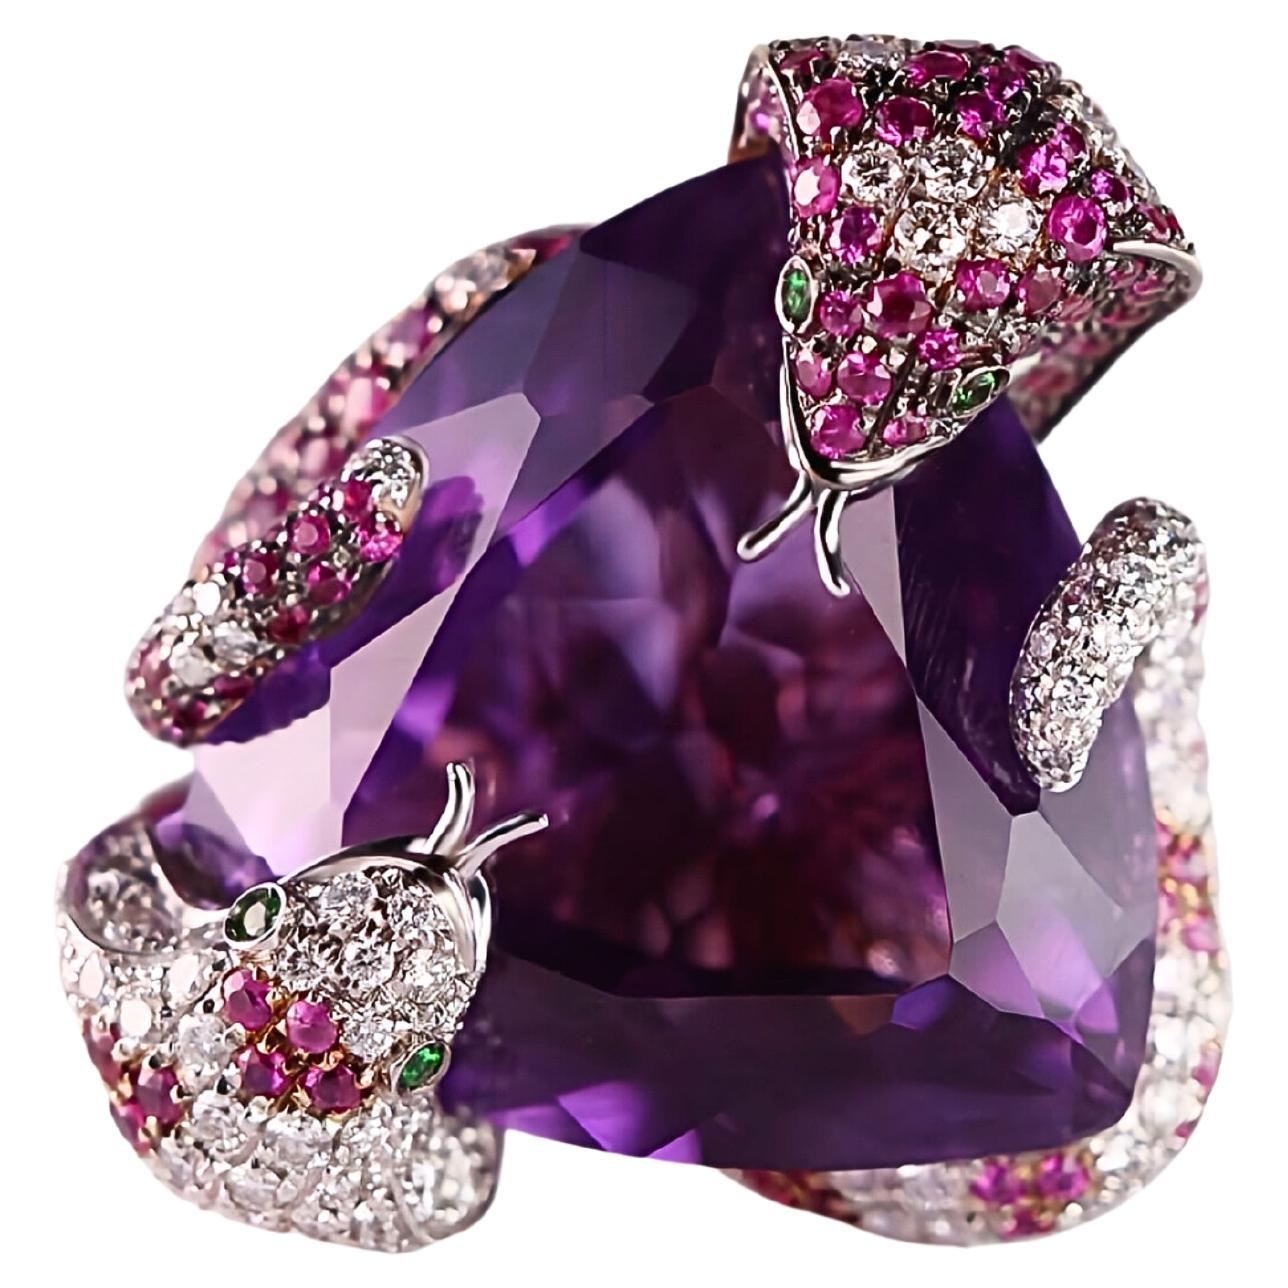 "Cobra Dance: 18kt Gold Ring with Amethyst, Diamonds & Rubies" For Sale